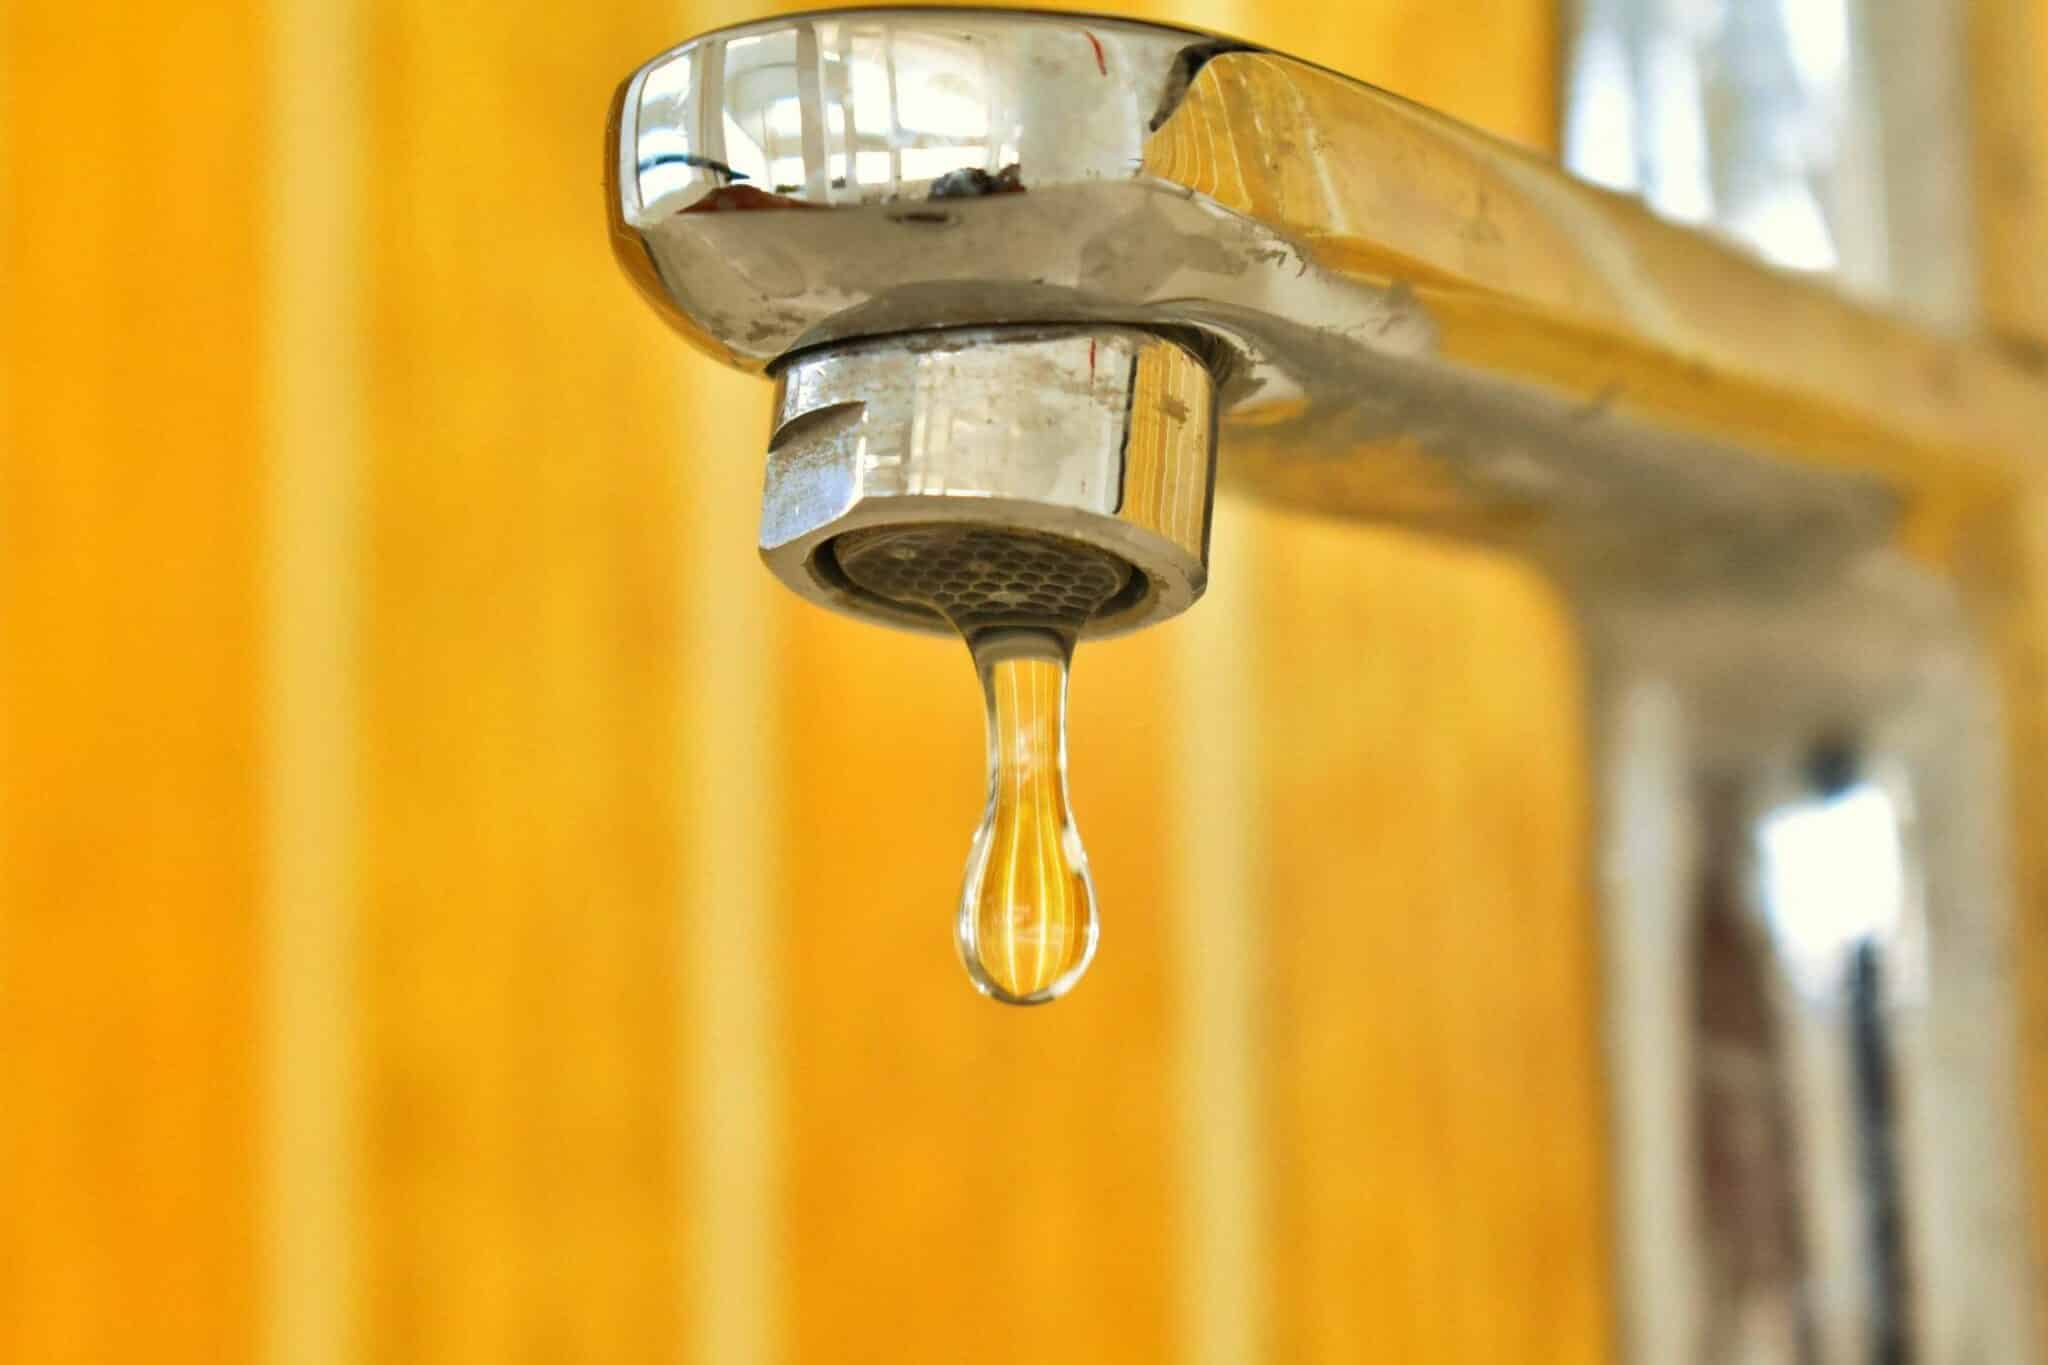 3 Consequences of Water Leak to Your Home and Health